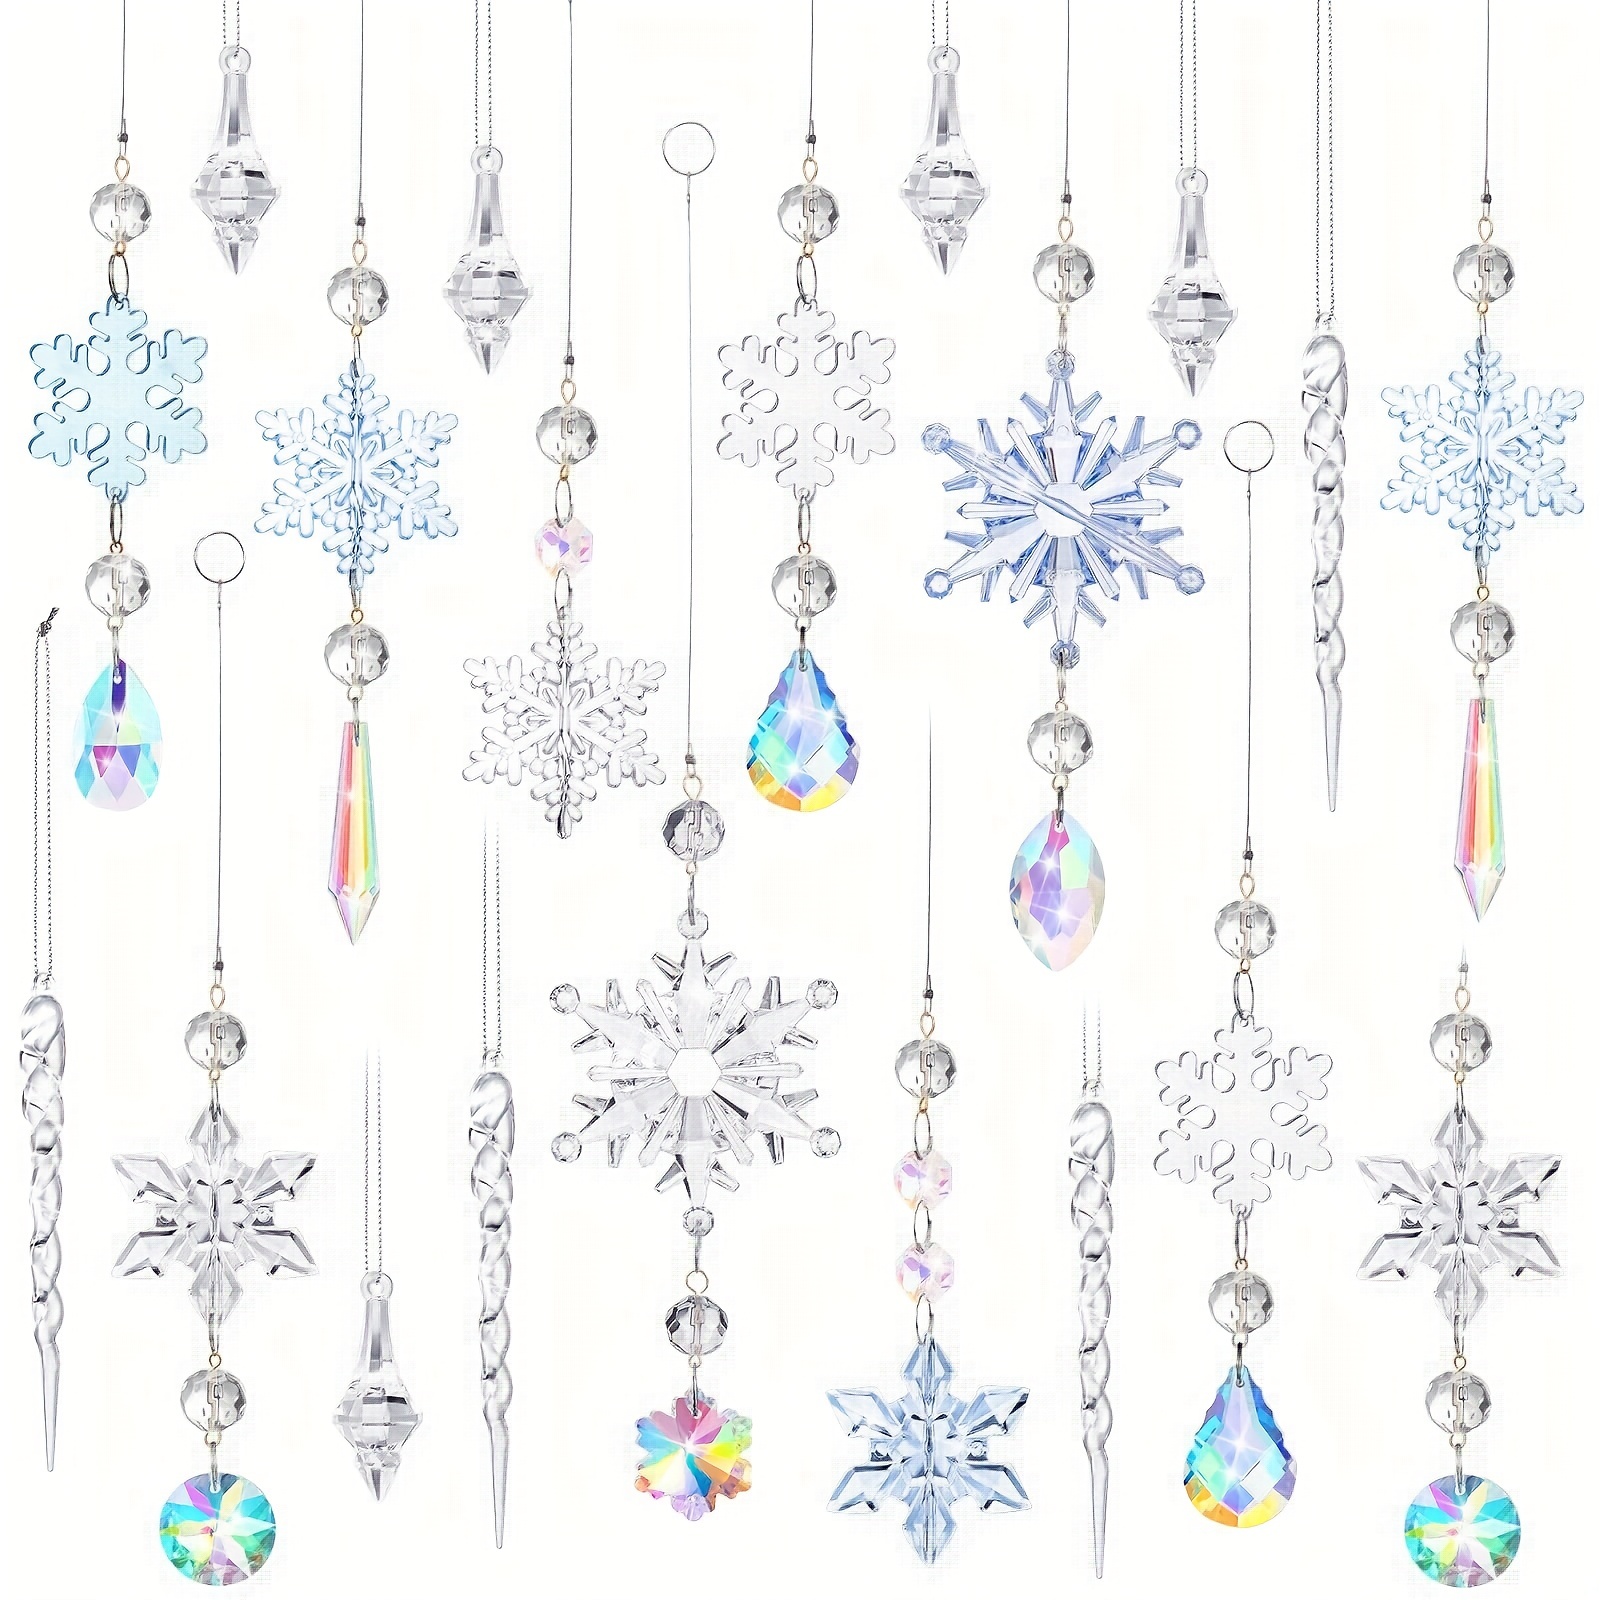 12pcs Colorful Christmas Ball Ornaments, Clear Chandelier Crystal